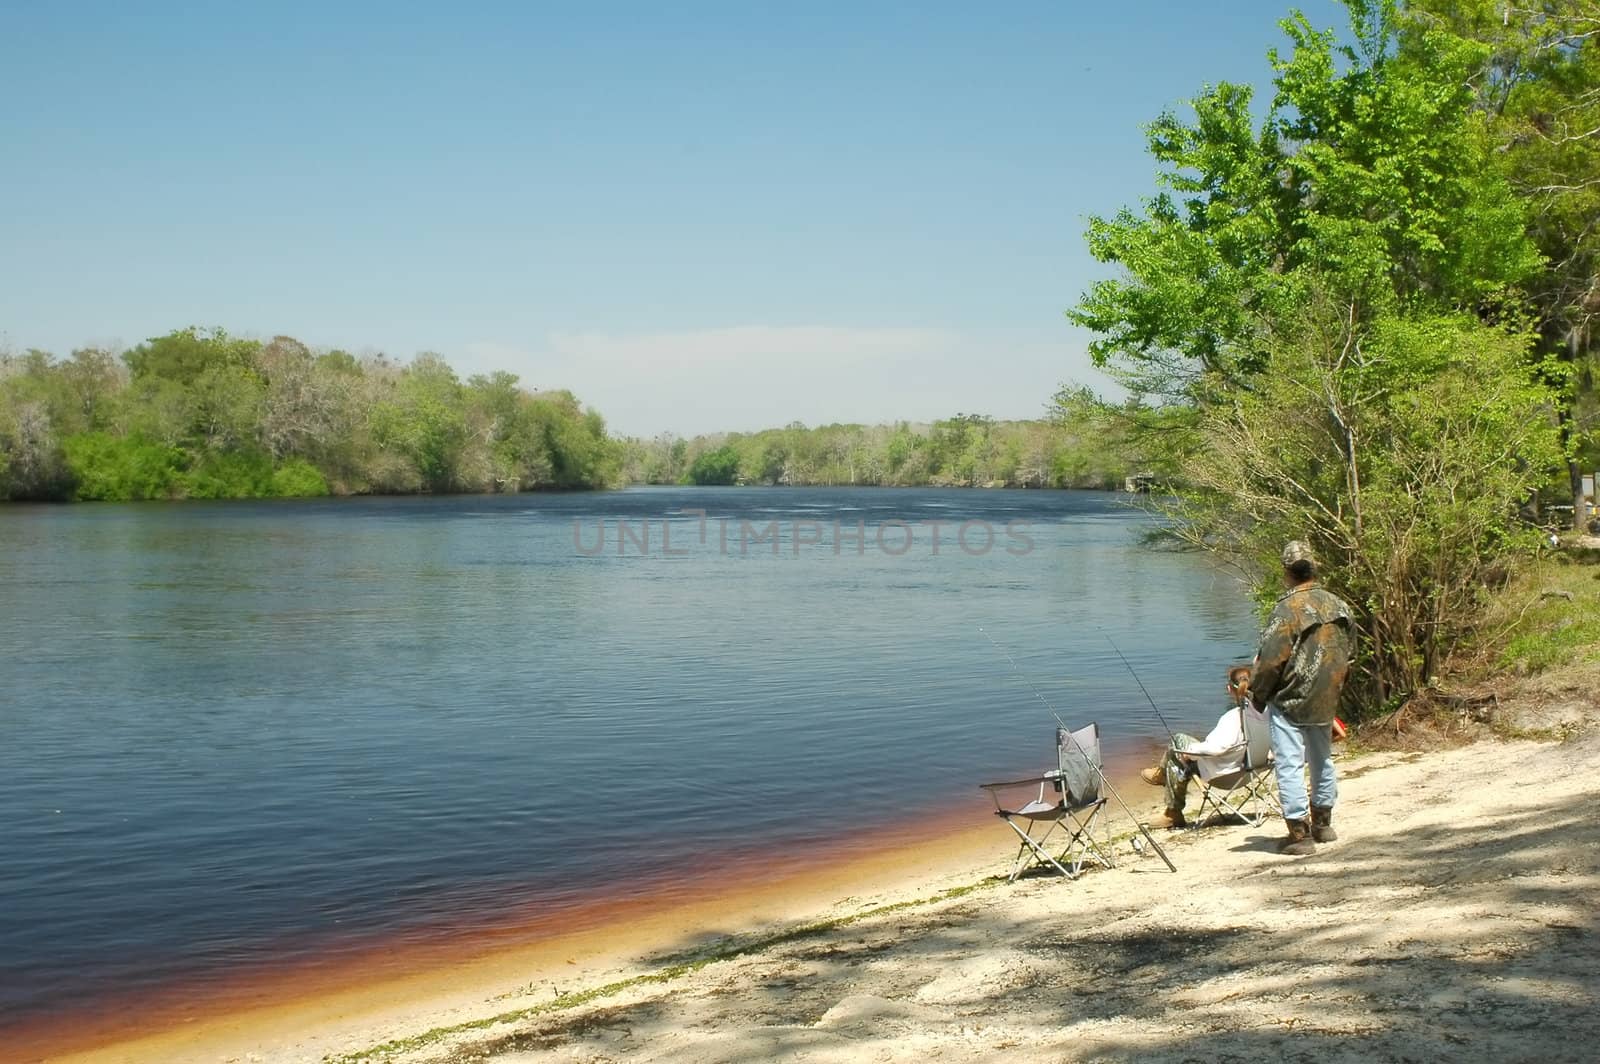 A family relaxes while fishing on the shore of the Suwannee River near Manatee Springs, Florida.